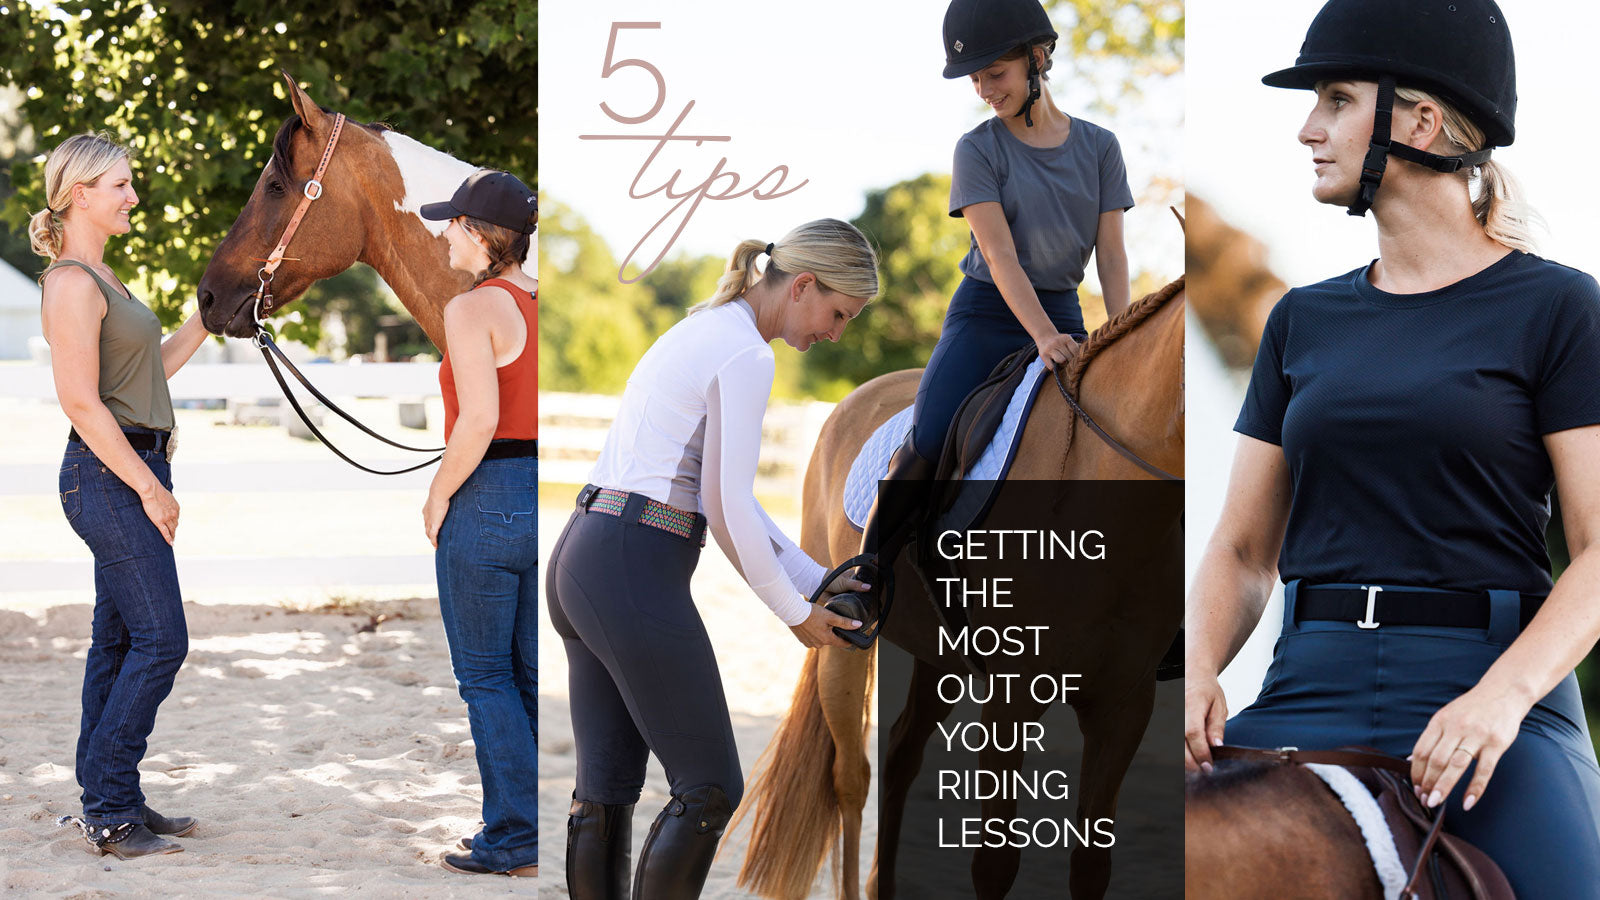 5 Tips for Getting the Most Out of Your Riding Lessons